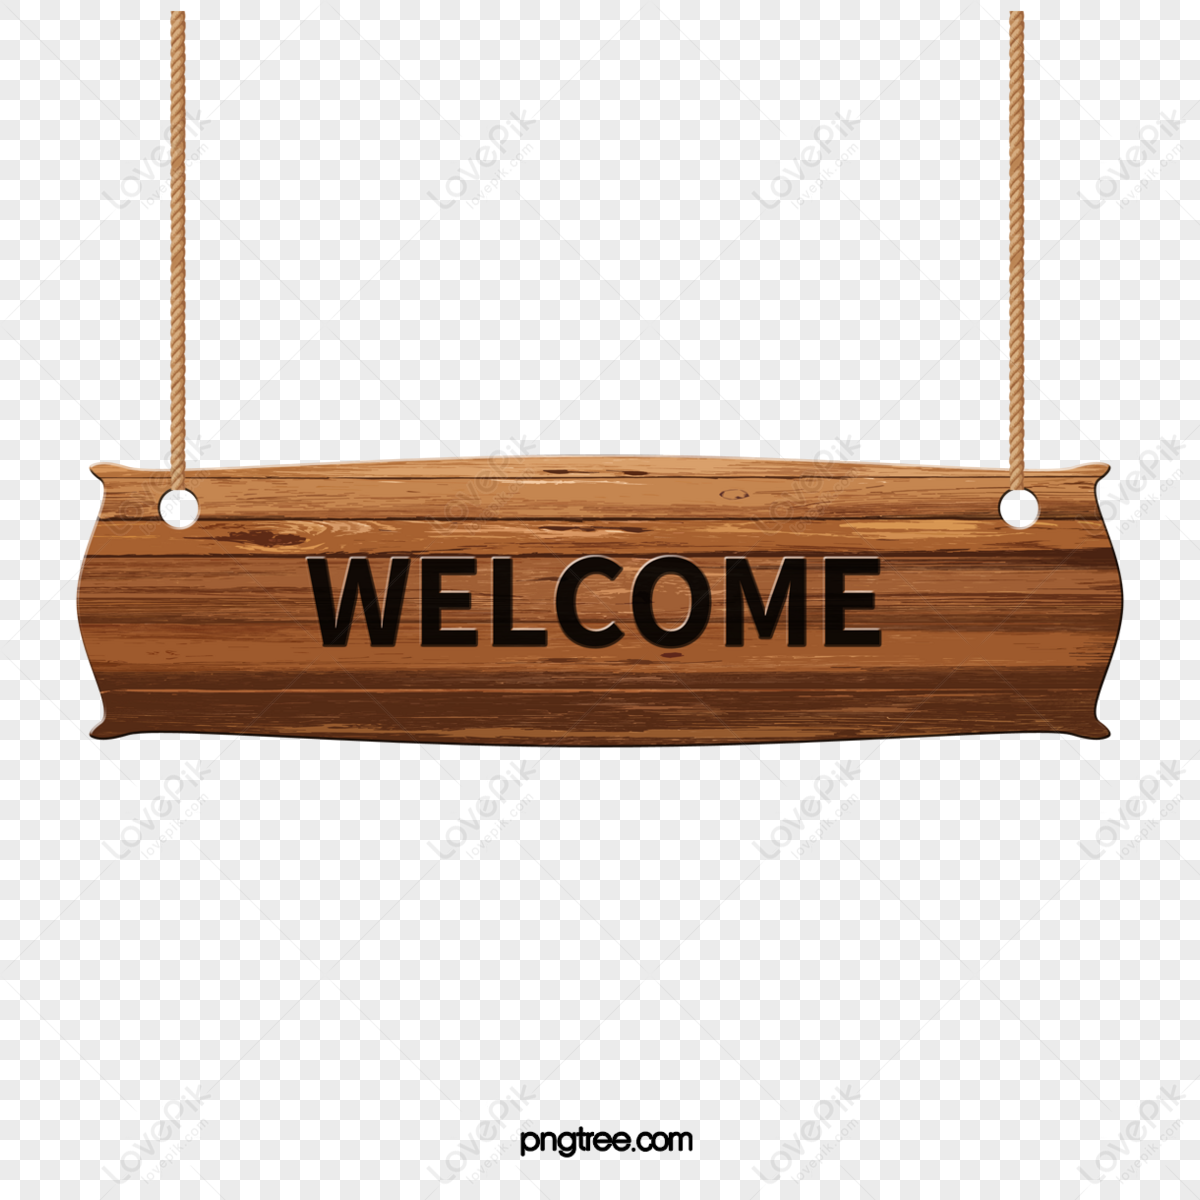 Welcome Back Vector Design Images, Welcome Back To School Vector, Welcome,  Back To School, Back To School Png PNG Image For Free Download